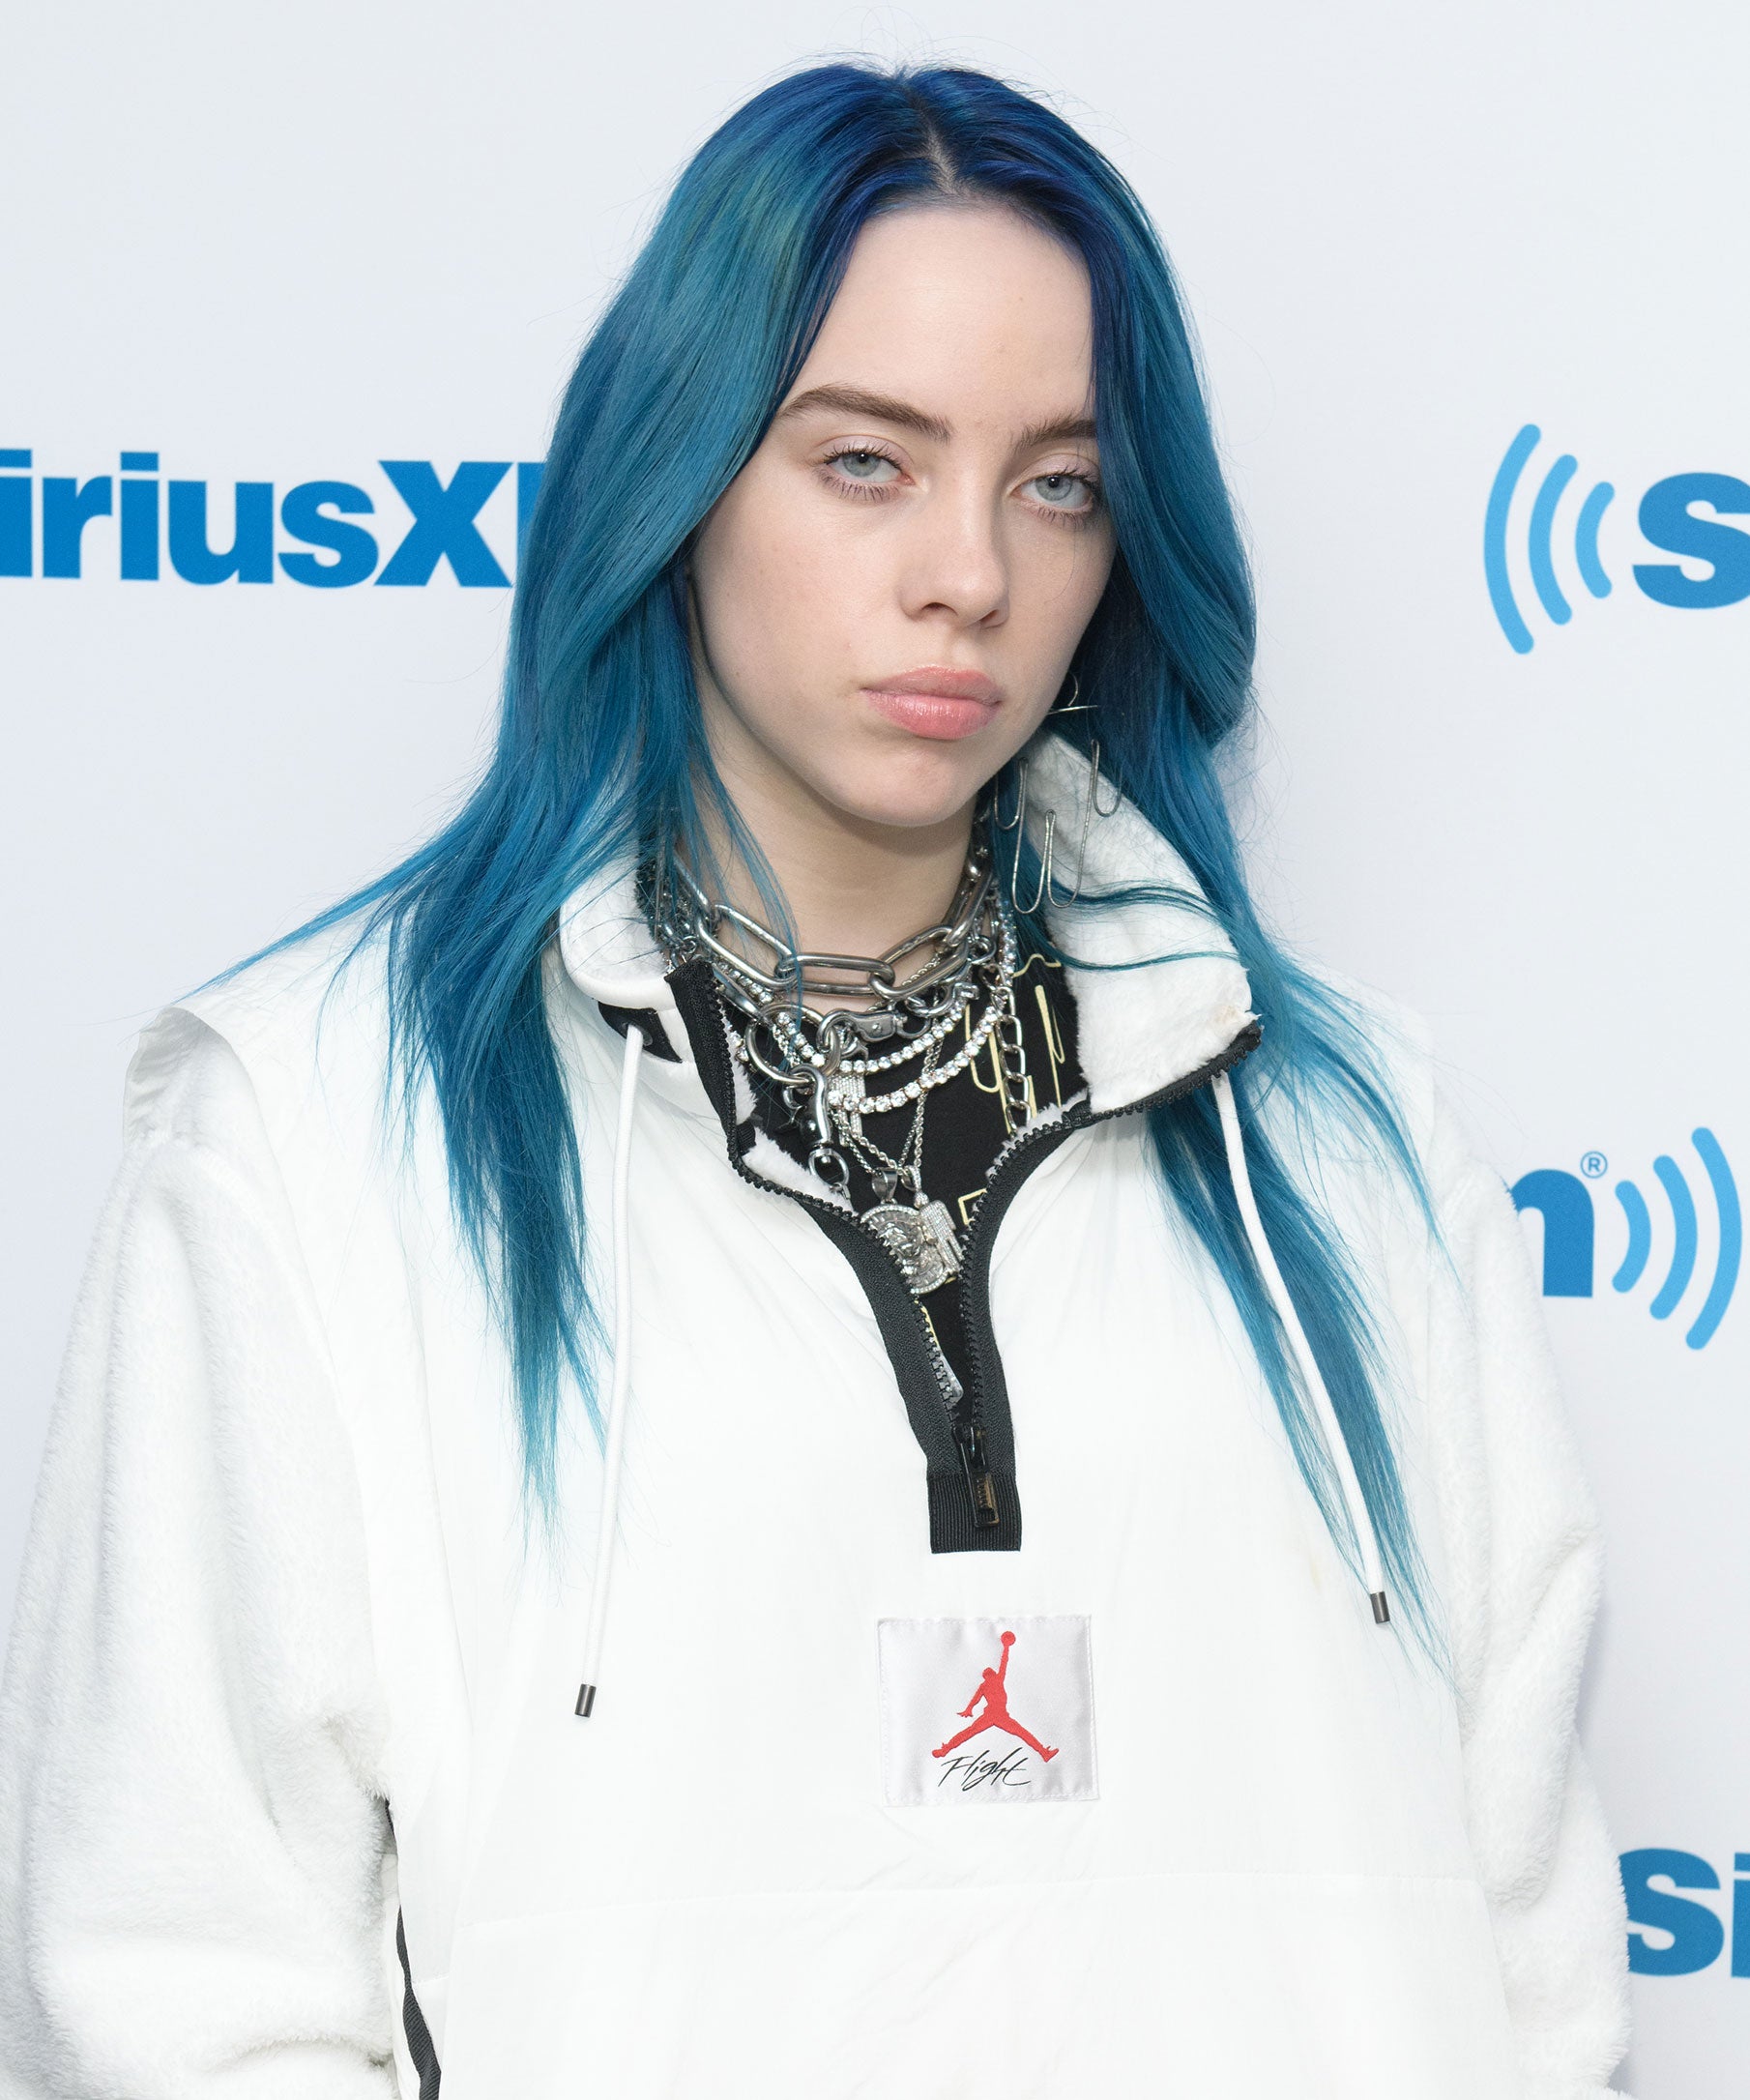 Billie Eilish Brought Back Green Hair Roots For Grammys